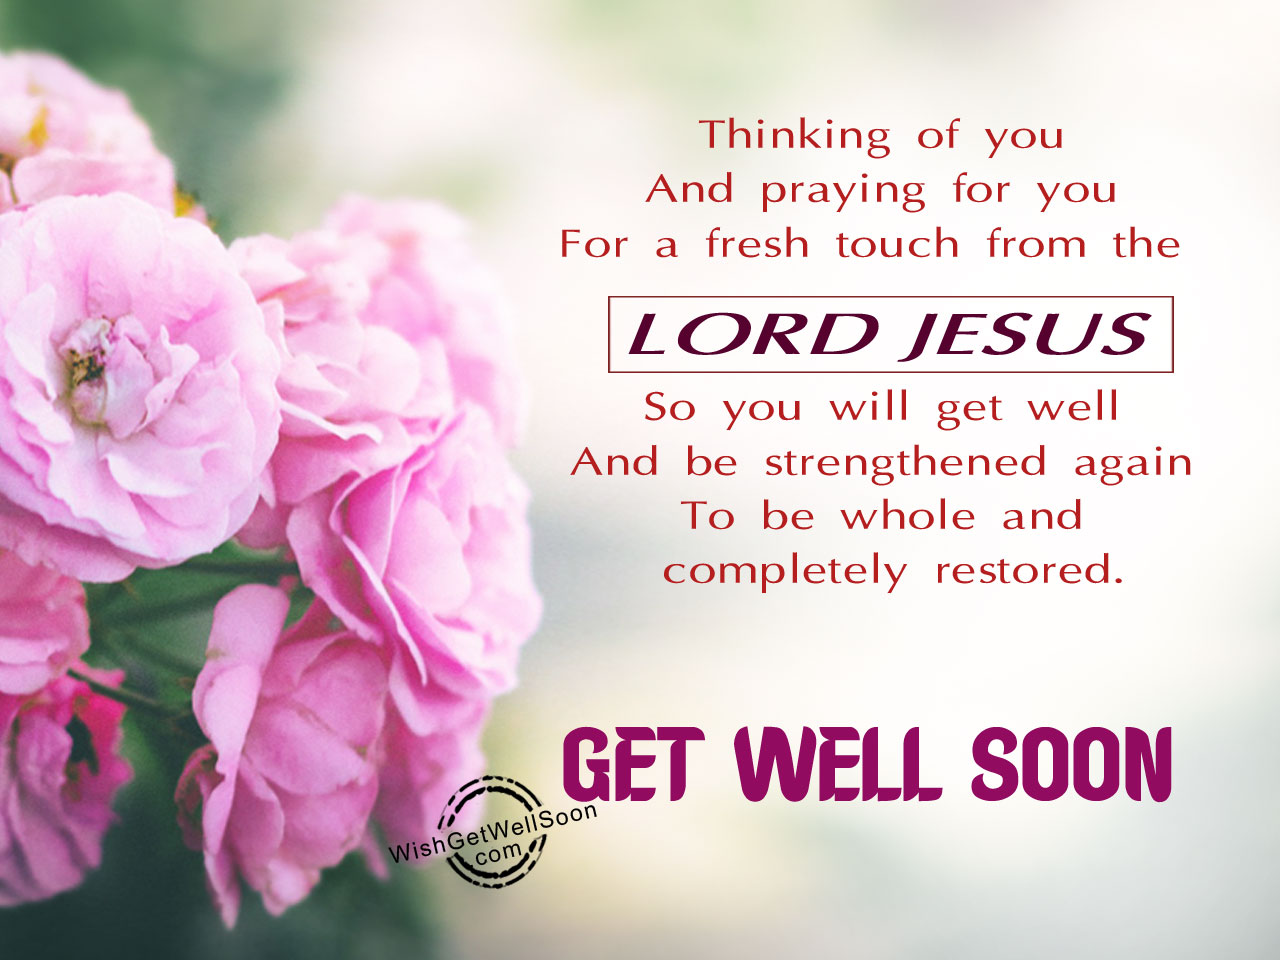 Ultimate Collection of 999+ Prayer Get Well Soon Images - Stunning ...